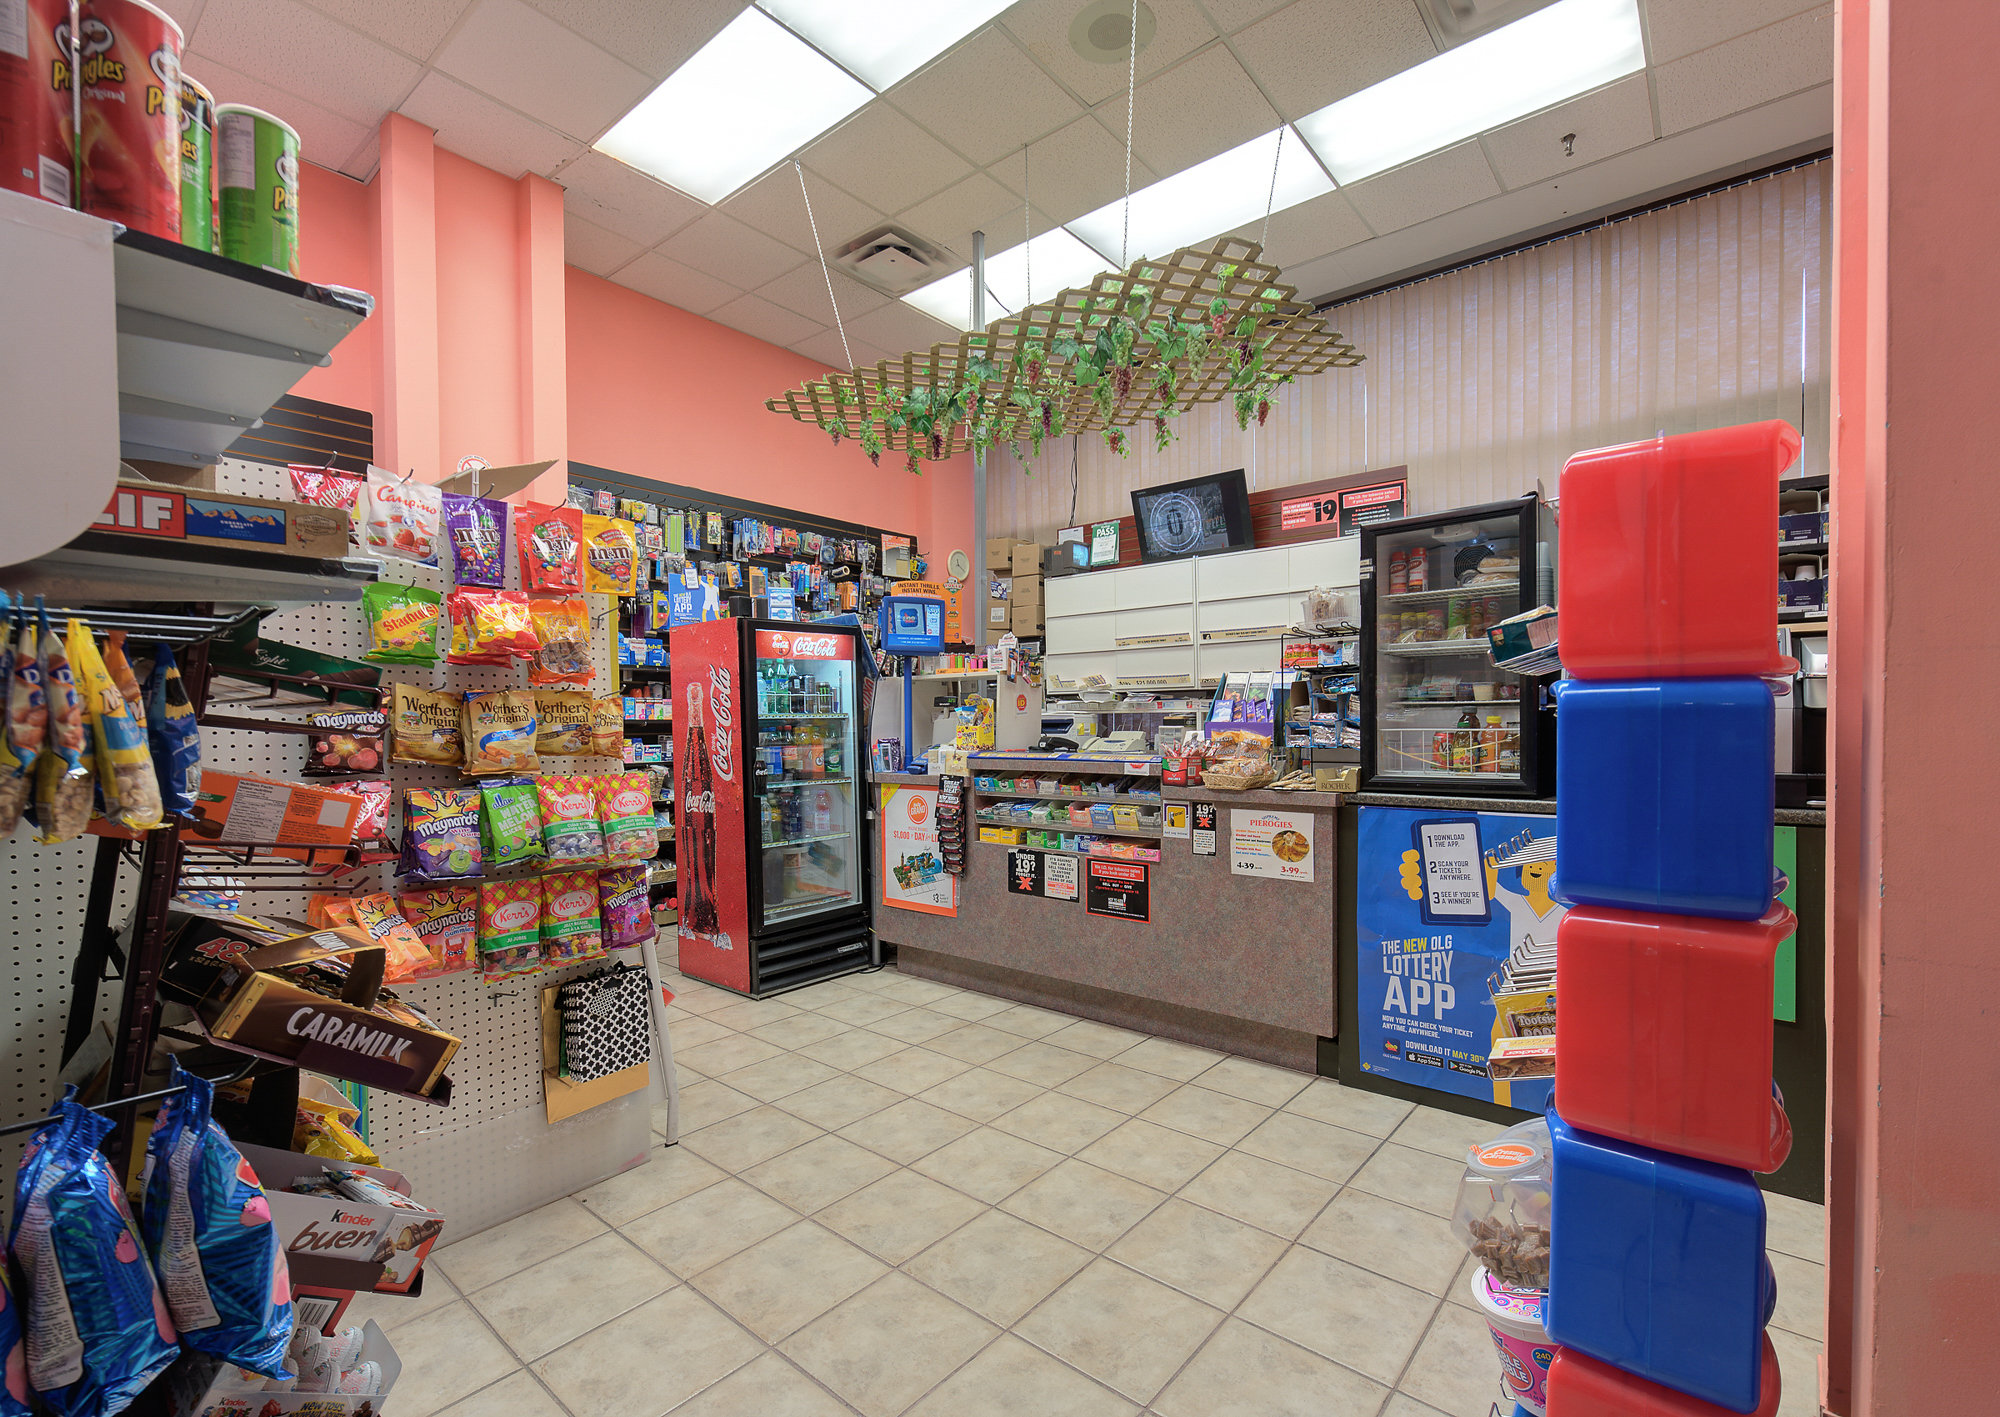 The Palace Pier Convenience Store